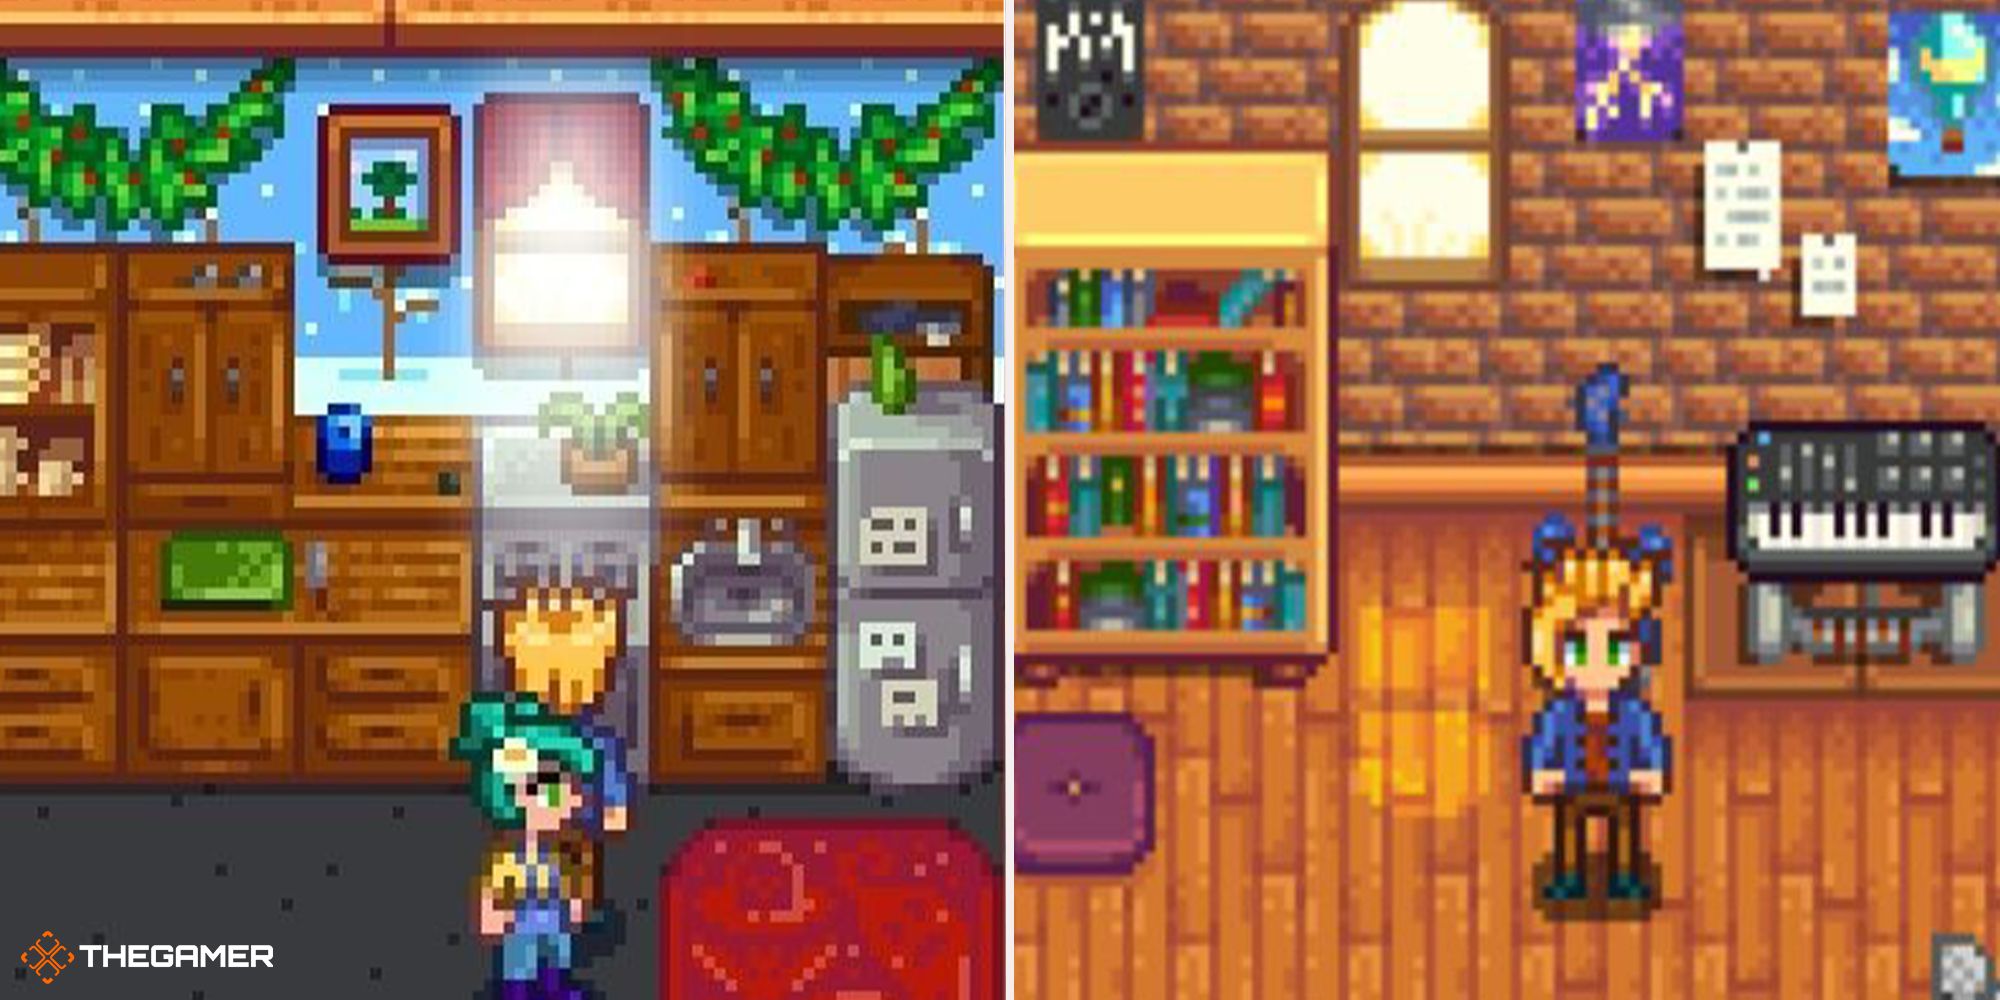 Stardew Valley - Sam in front of the fridge (left), in spouse room (right)